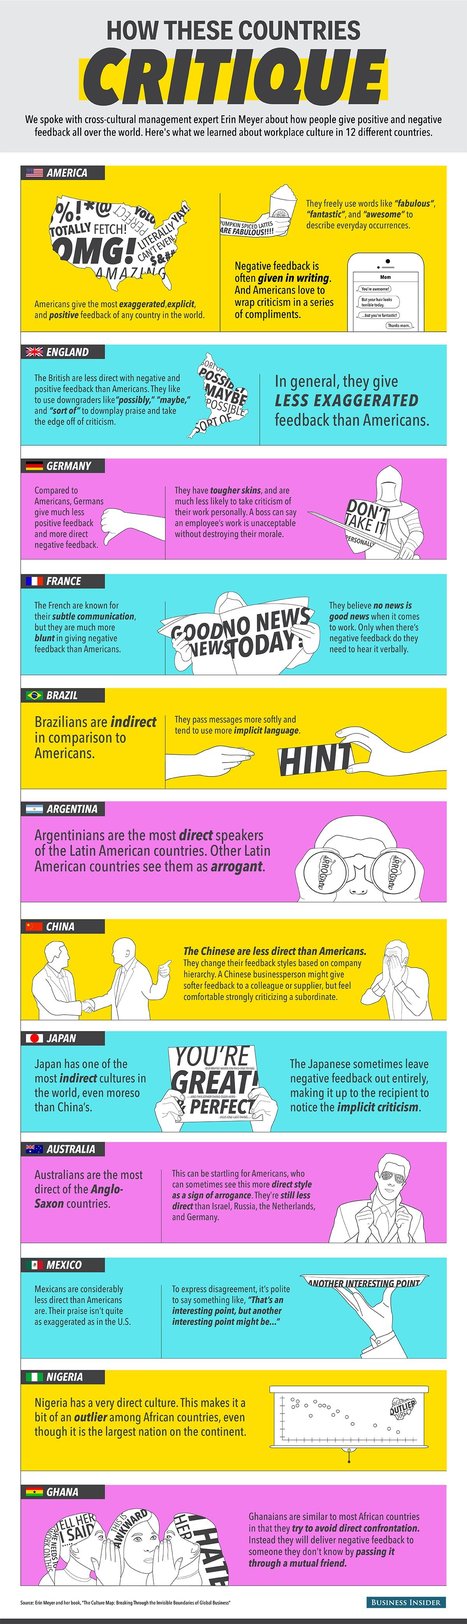 Here Are The Different Ways People Give Criticism Around The World | Communication | ICT | eSkills | 21st Century Learning and Teaching | Scoop.it